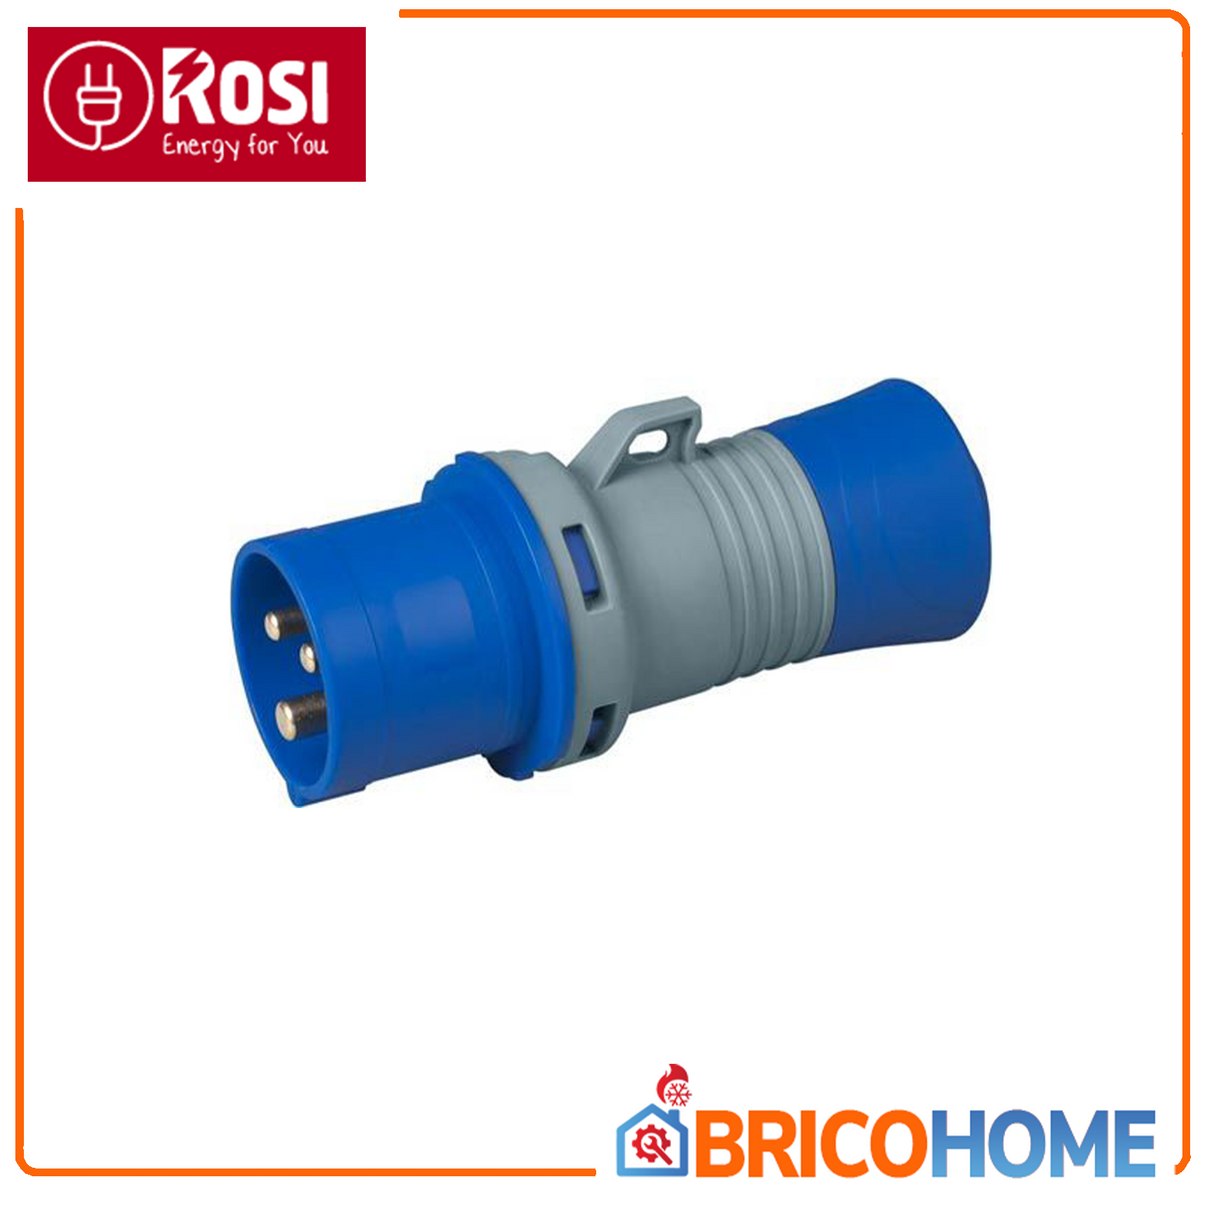 Spina volante industriale CEE 16A 2P+T 220V IP44 ROSI